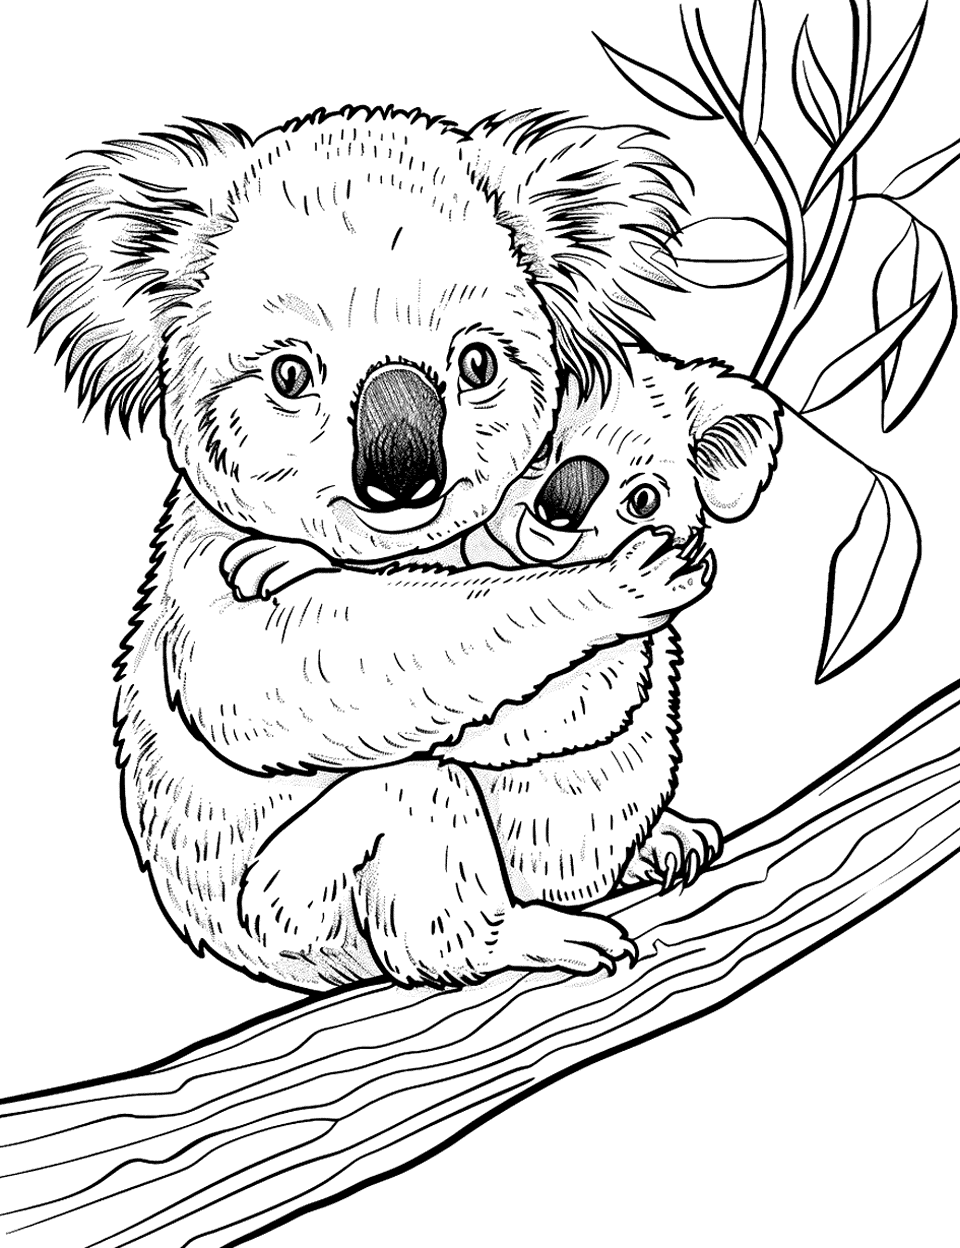 Baby Koala Cuddling Coloring Page - A baby koala hugging its mother as they sit together on a branch.